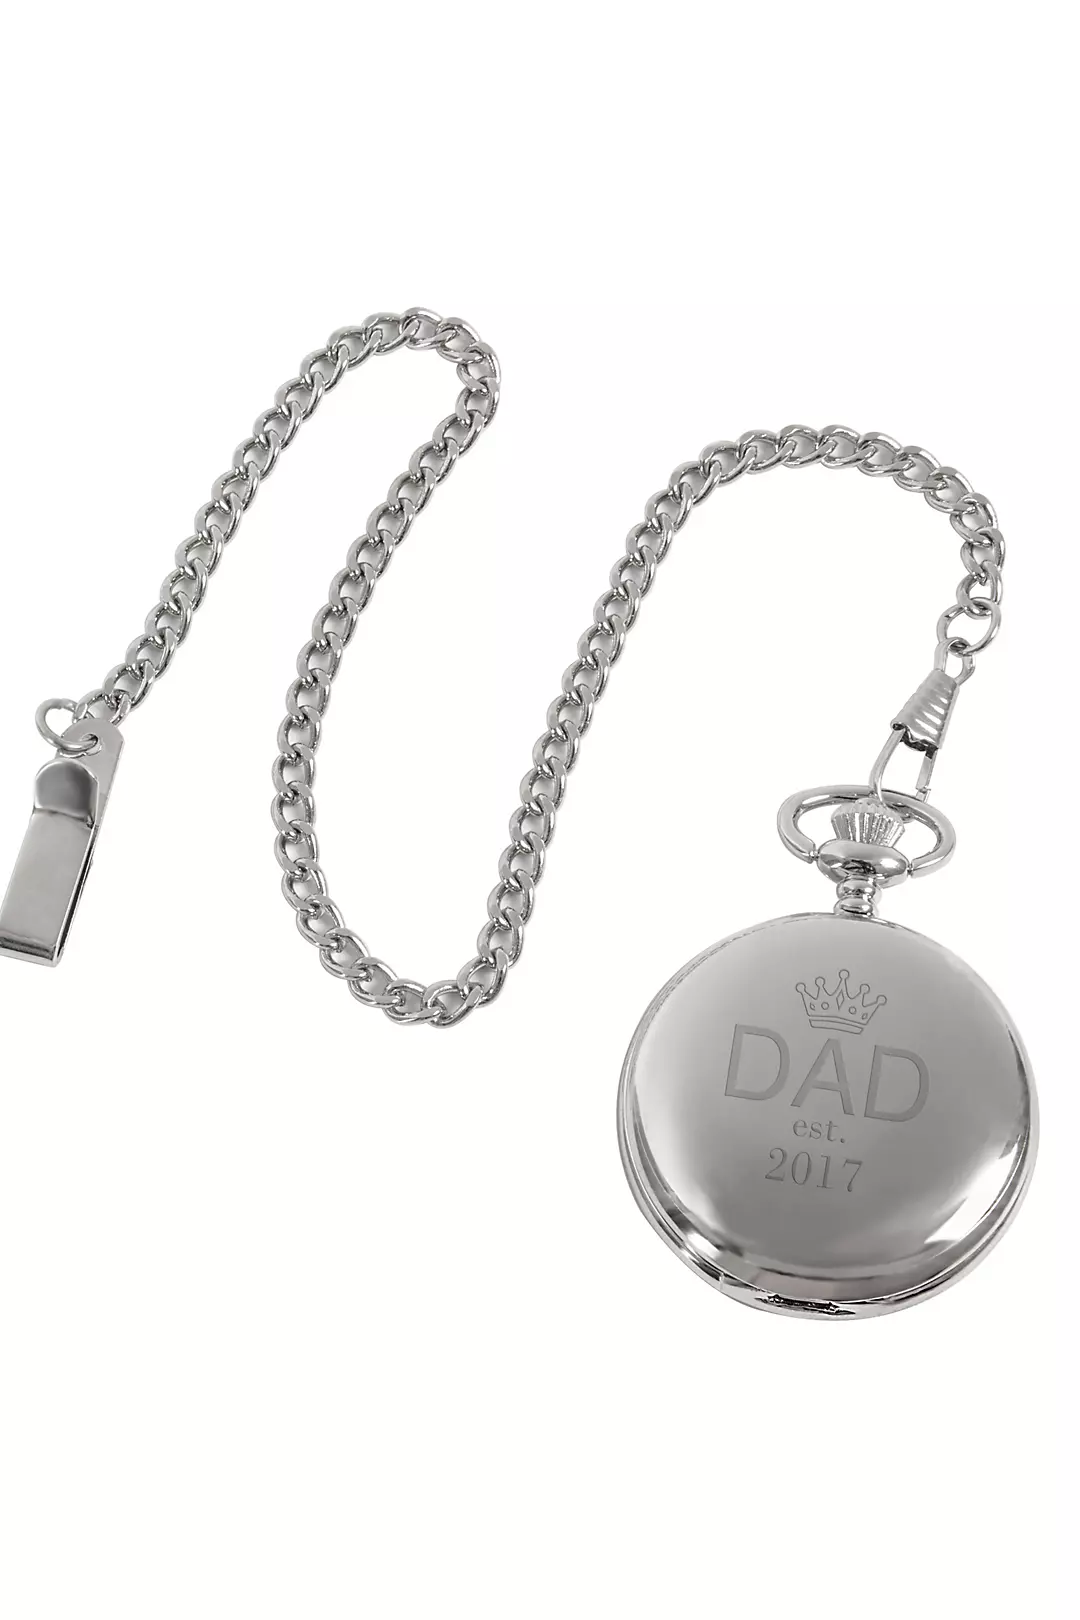 Personalized Dad Pocket Watch Image